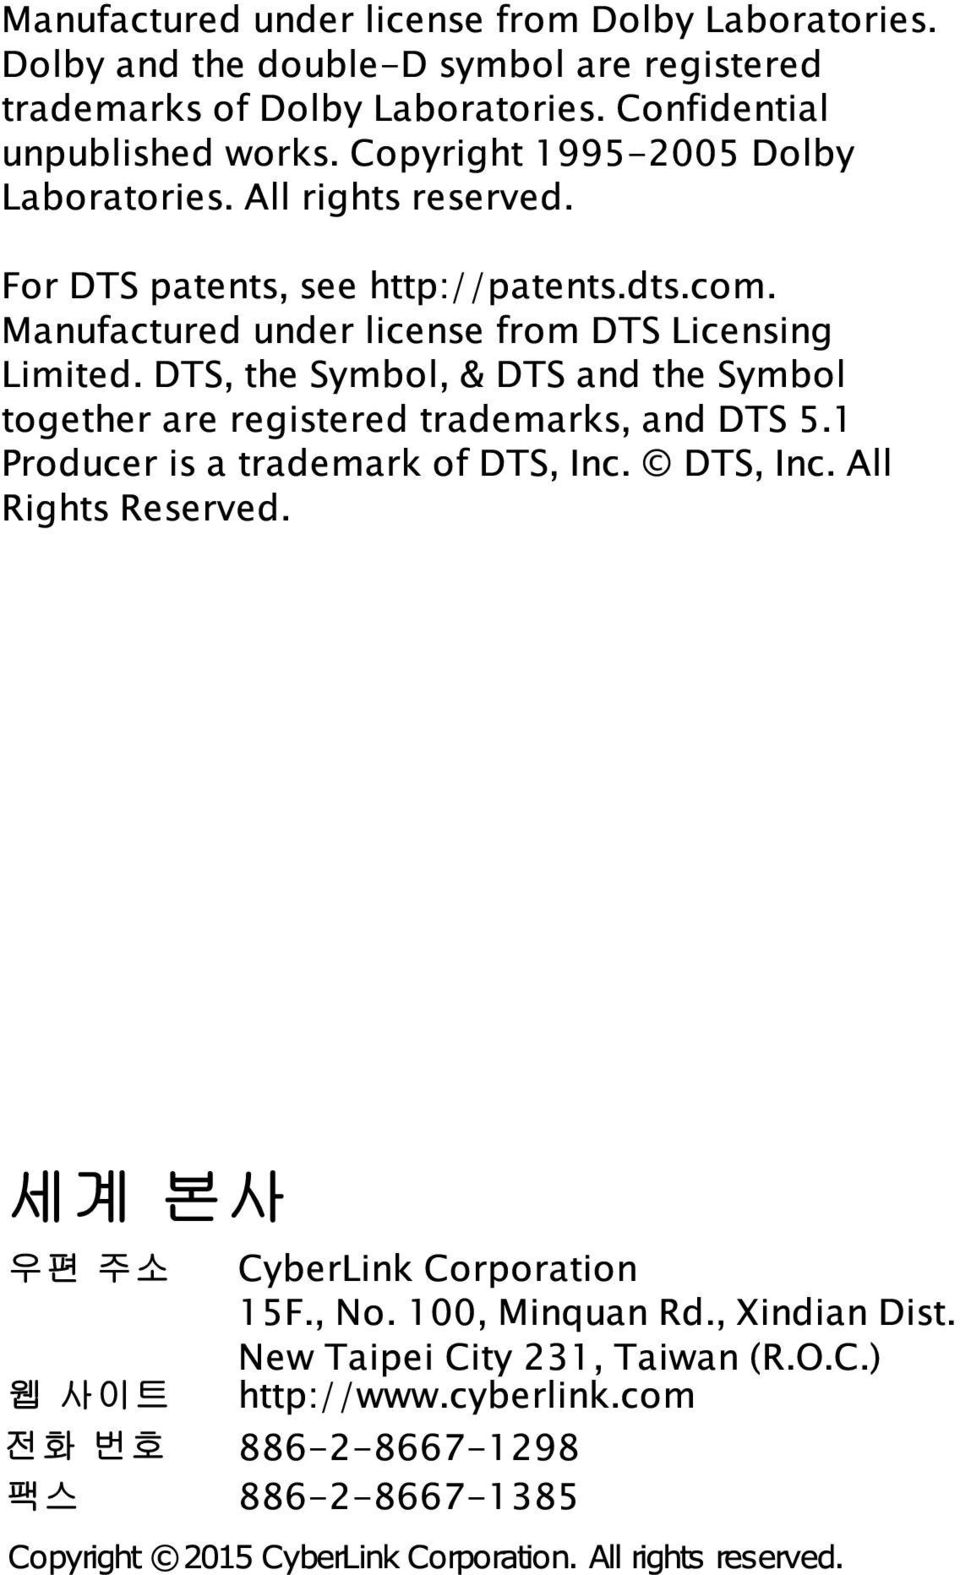 DTS, the Symbol, & DTS and the Symbol together are registered trademarks, and DTS 5.1 Producer is a trademark of DTS, Inc. DTS, Inc. All Rights Reserved.